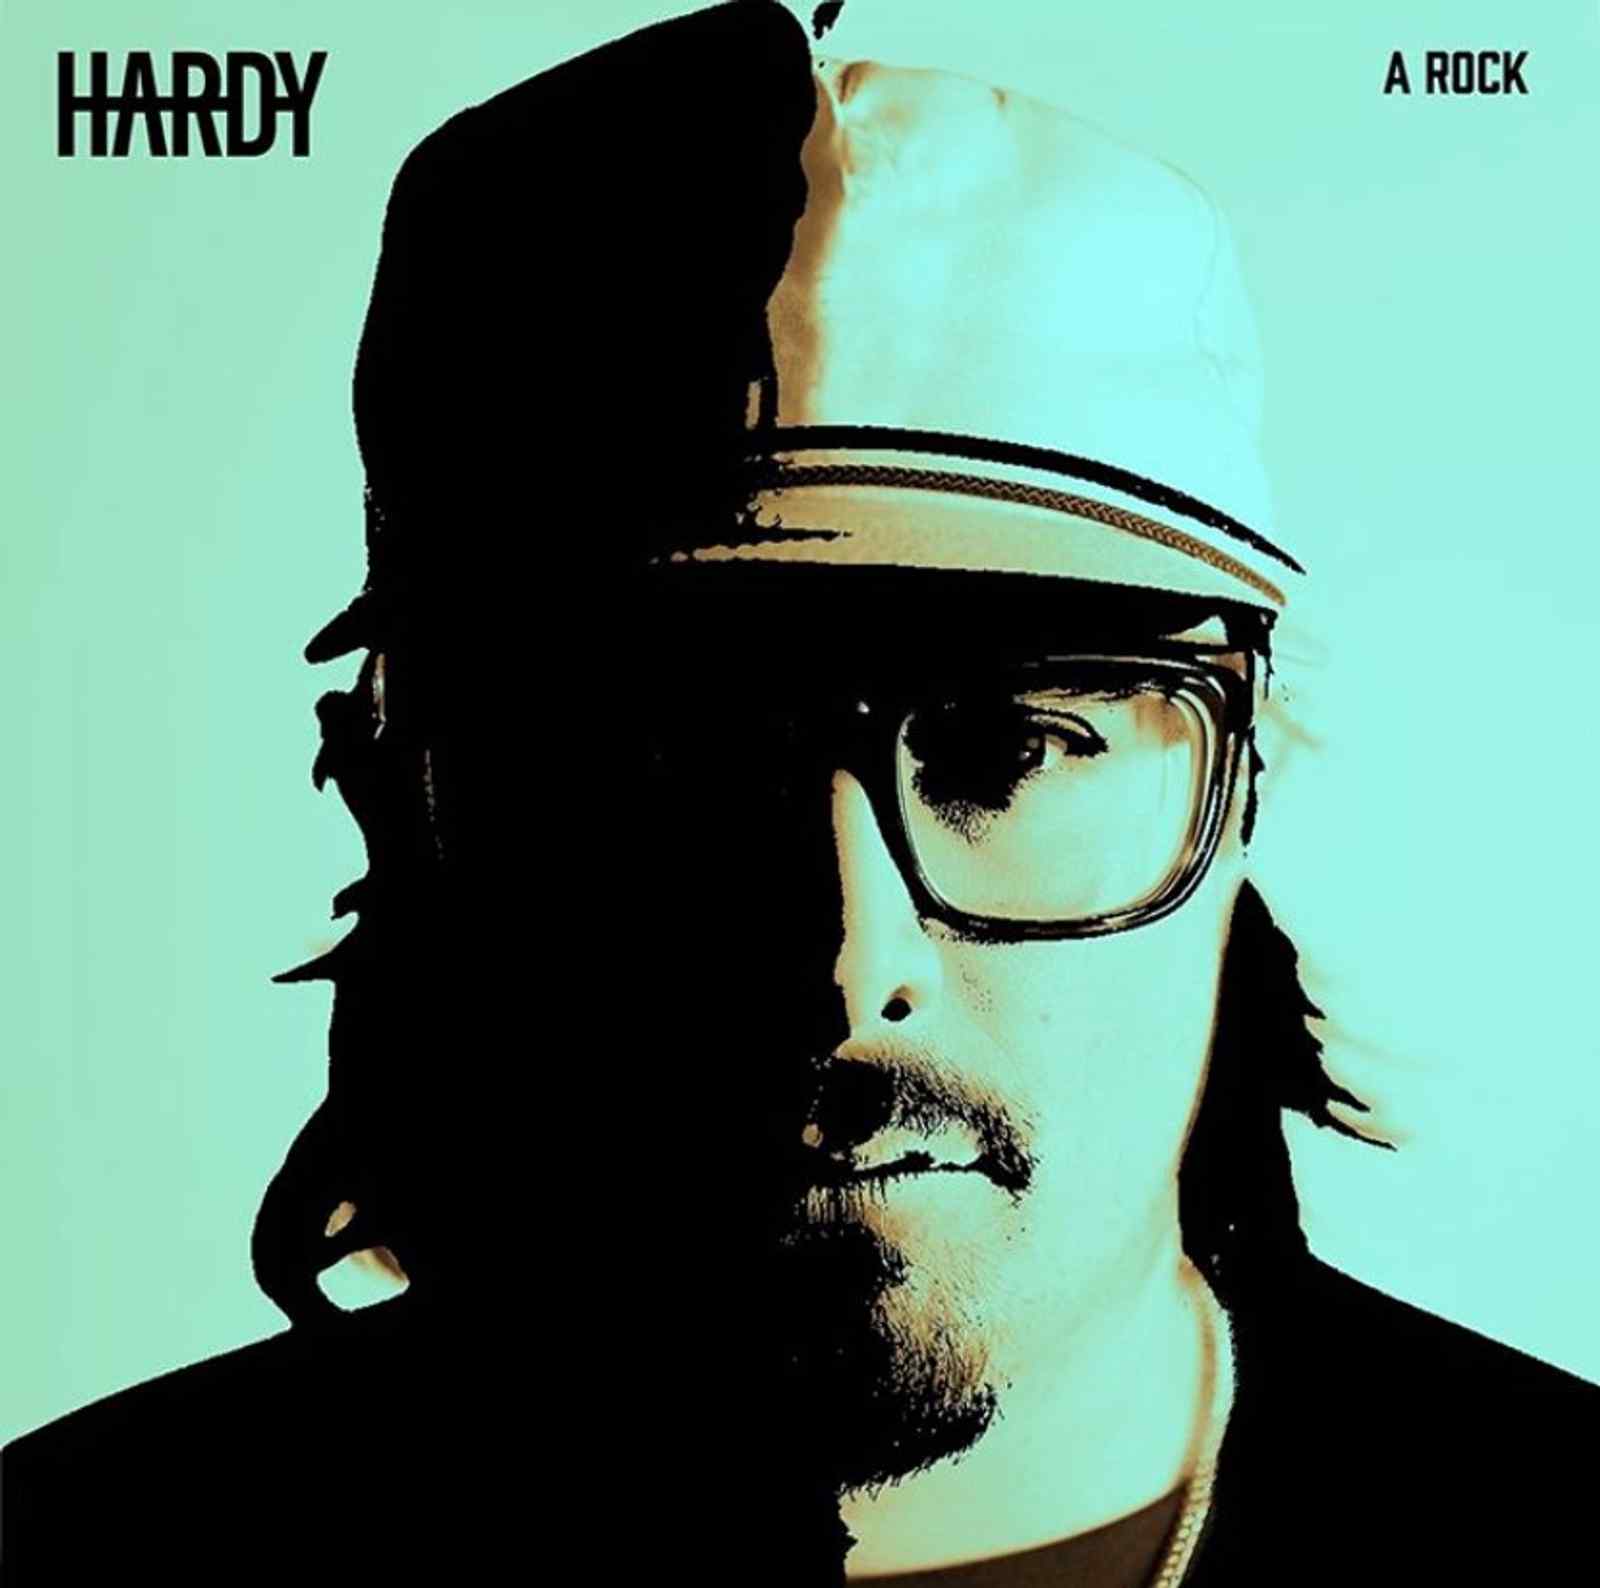 New Song: "GIVE HEAVEN SOME HELL" by HARDY